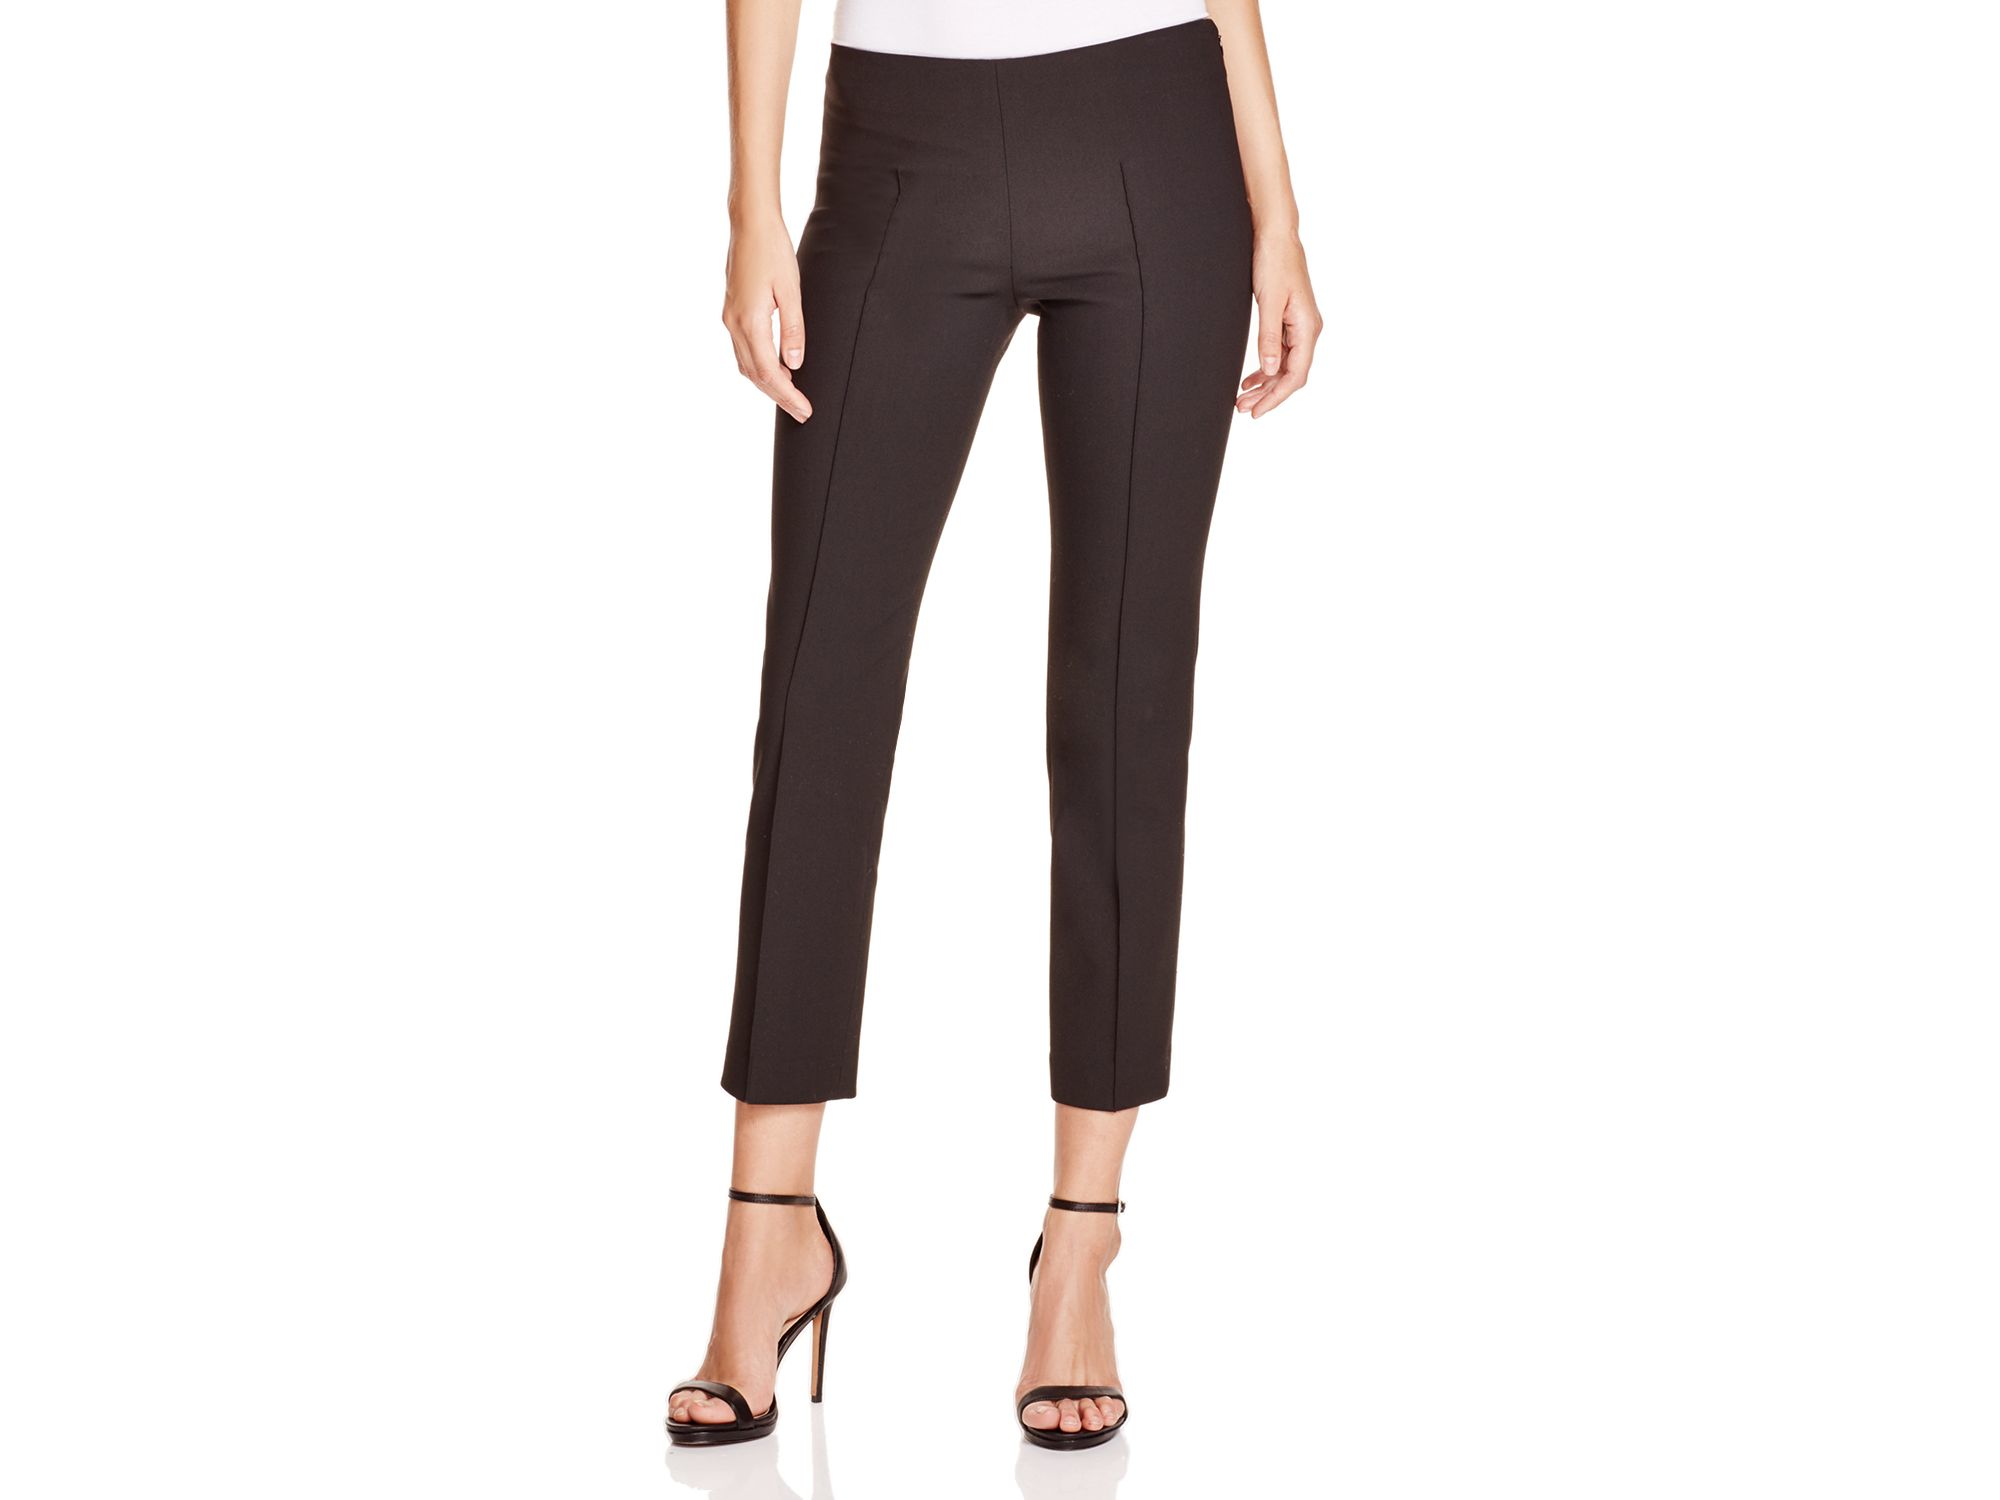 Lyst - Elizabeth And James Remy Pants in Black